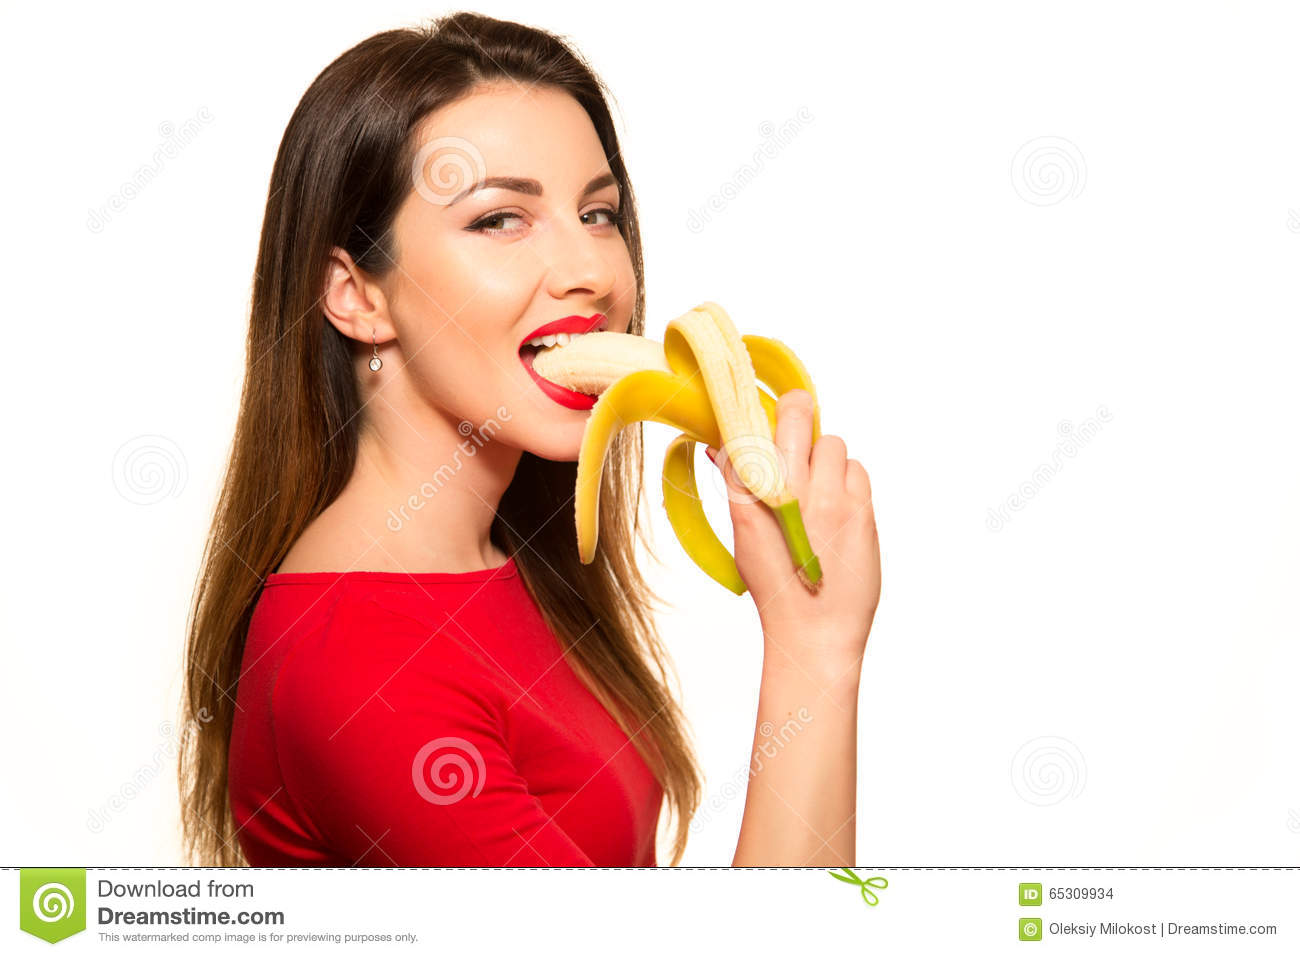 sexy-woman-red-clothes-eating-banana-white-background-isol-isolated-smiling-65309934.jpg